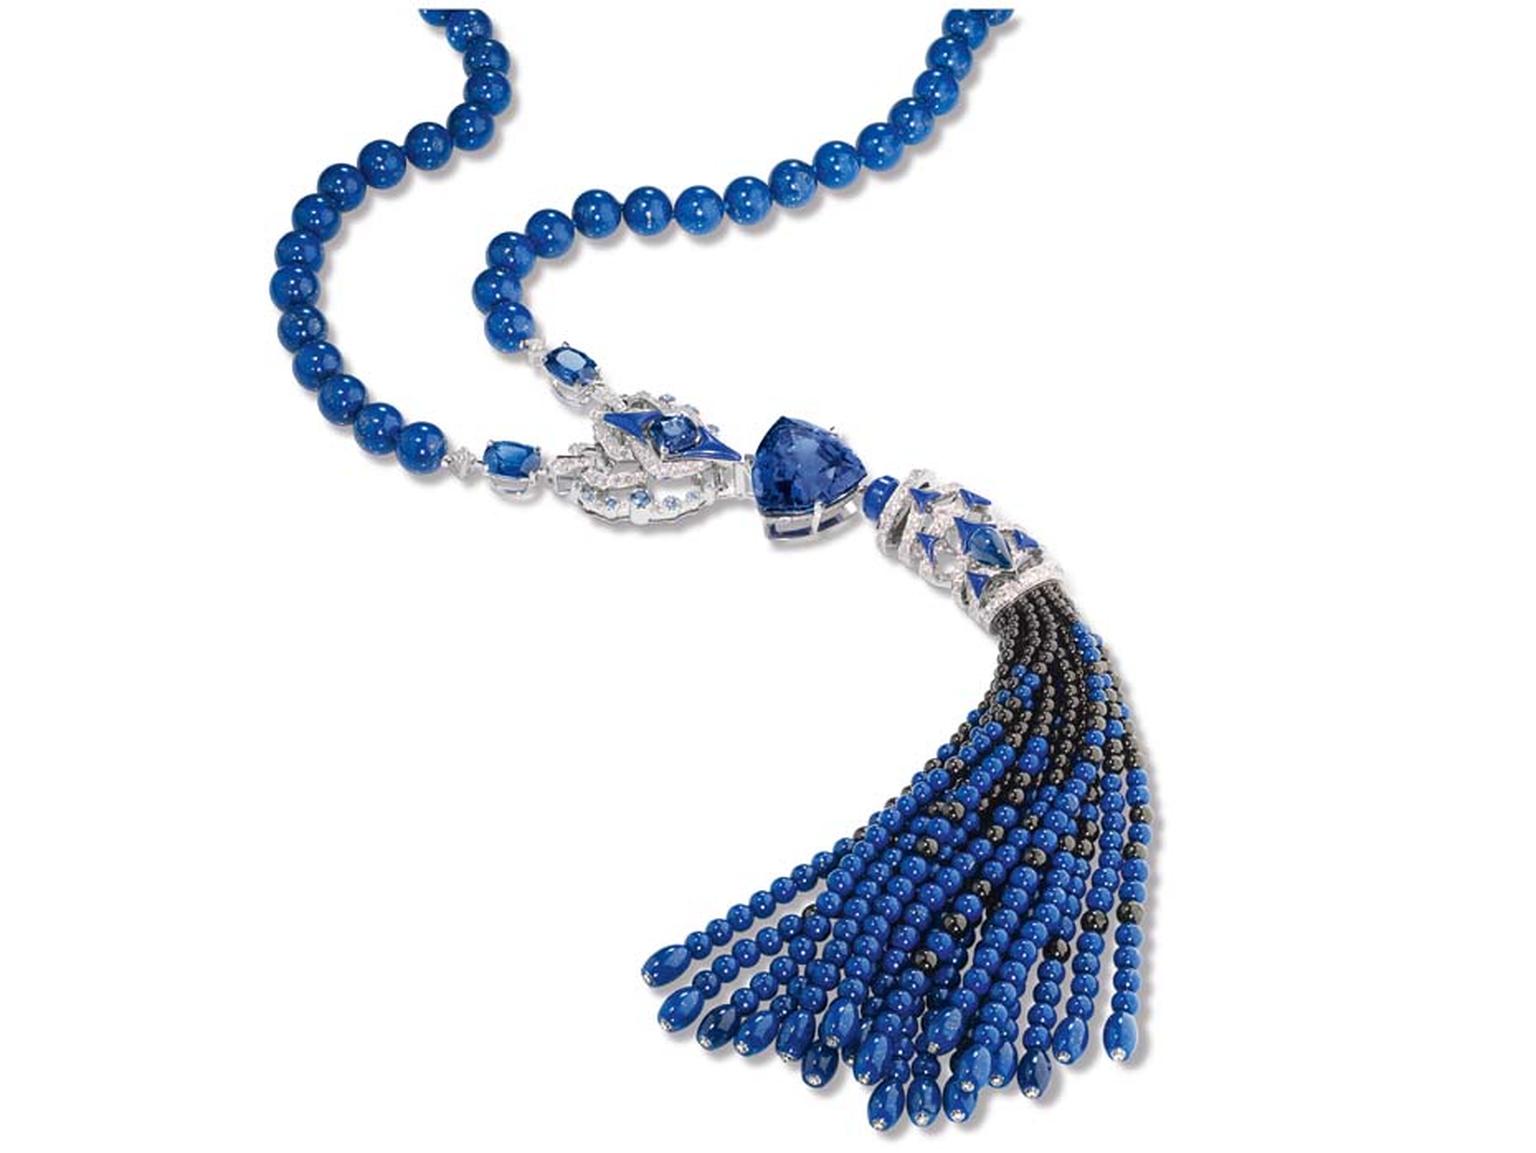 Chaumet Lumières d'Eau collection diamond necklace embellished with a pompom of graded lapis lazuli and black spinels.